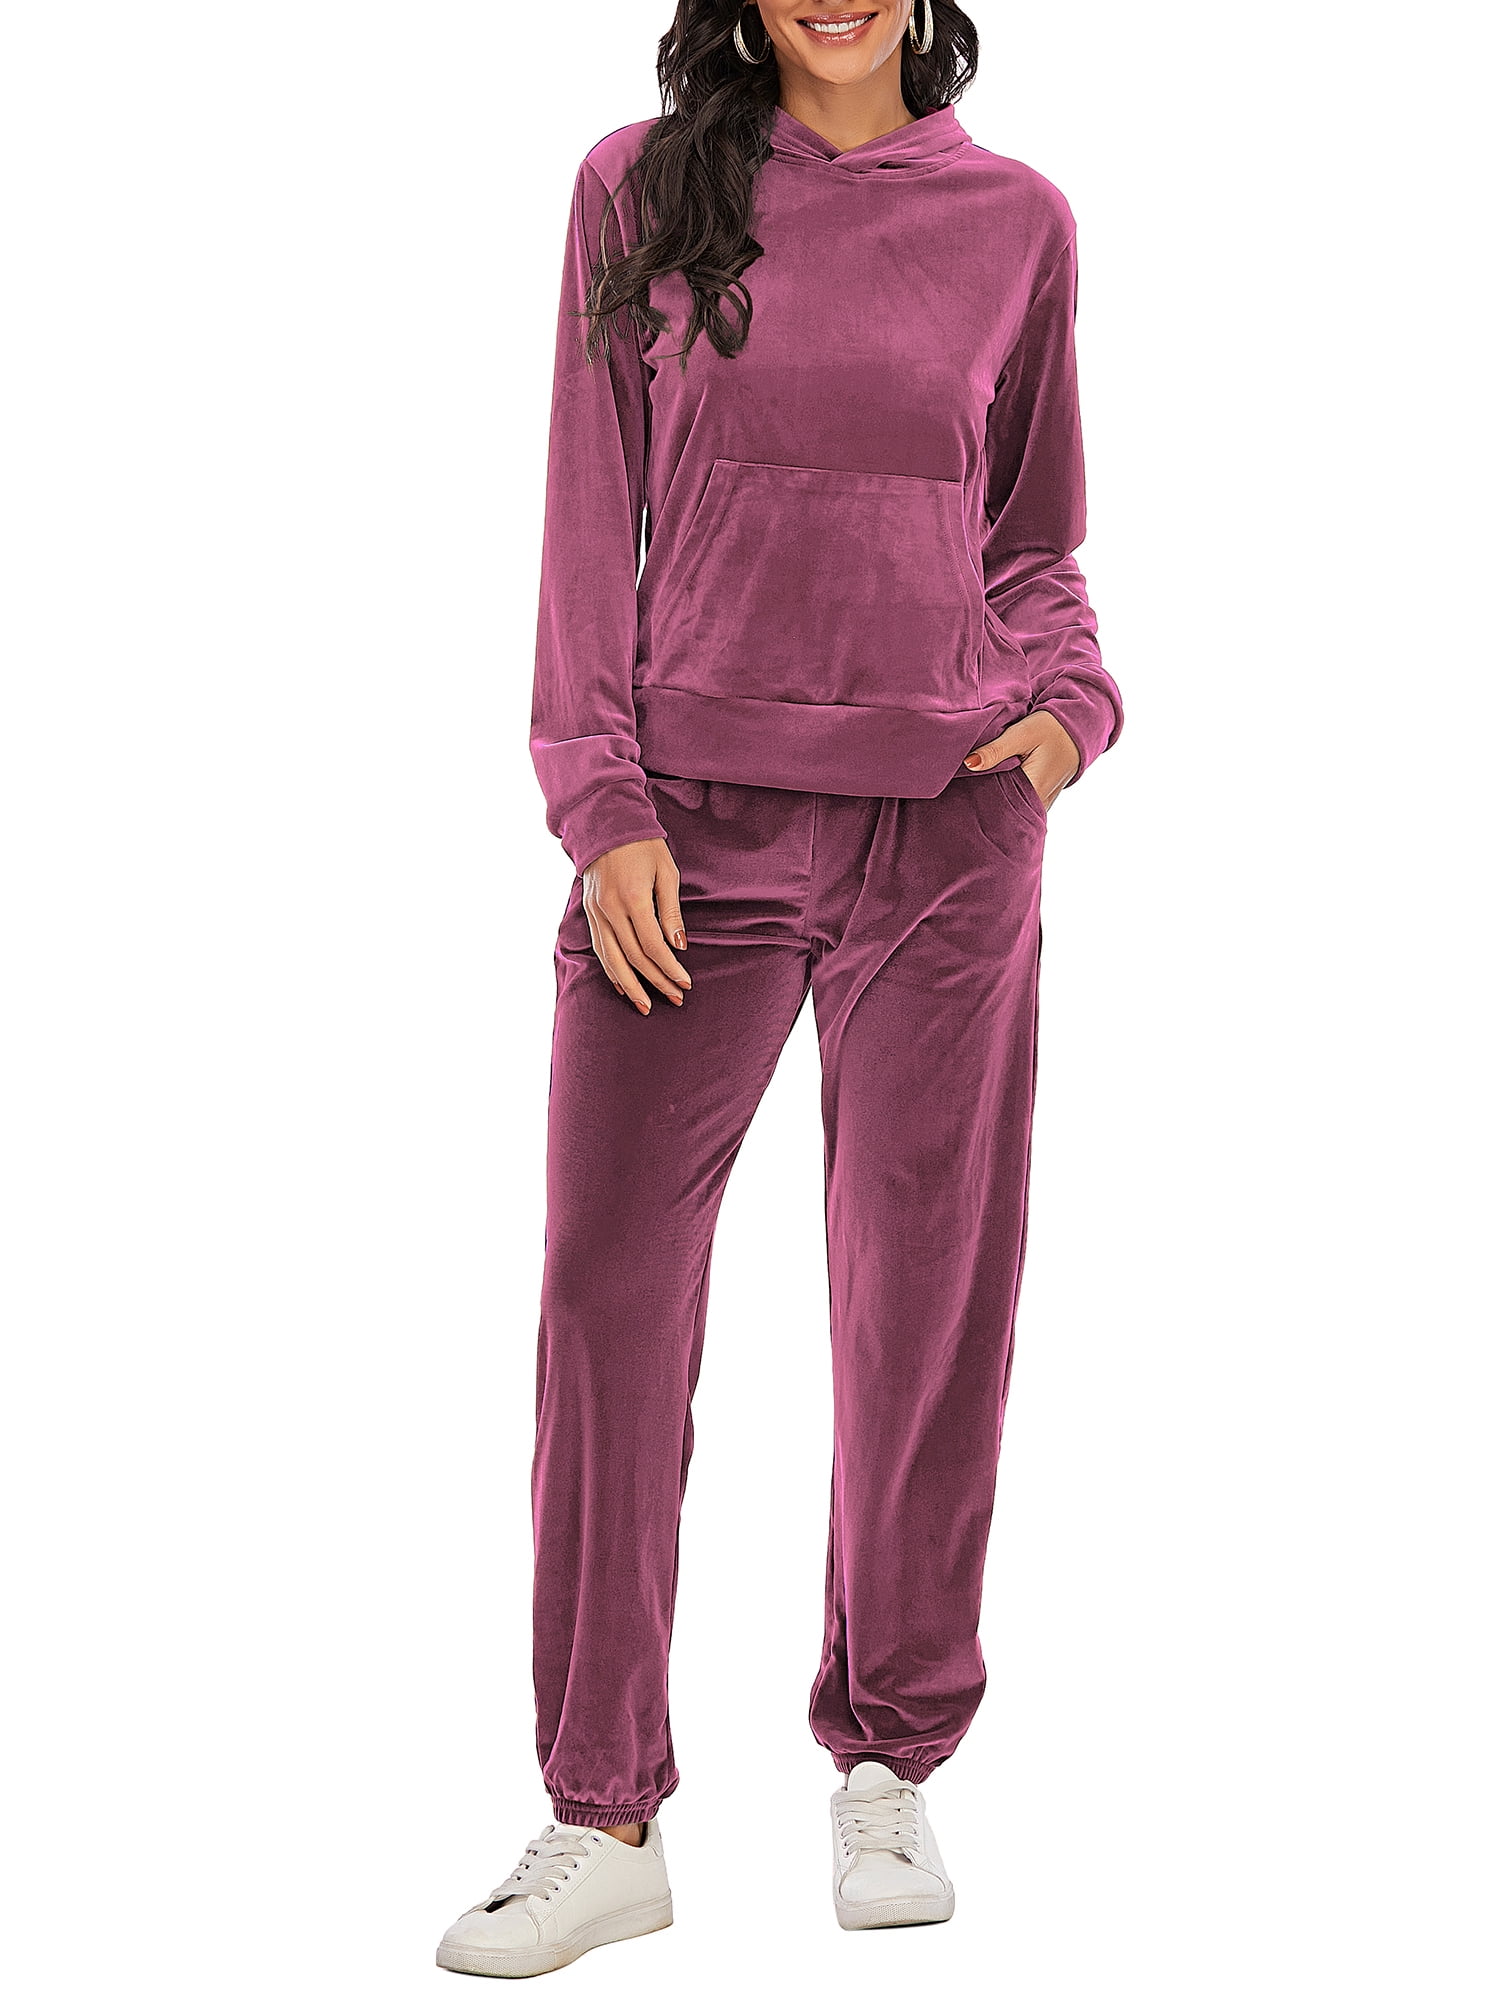 YouLoveIt Women's Plus Size Velour Tracksuits Zip Up/Pullover